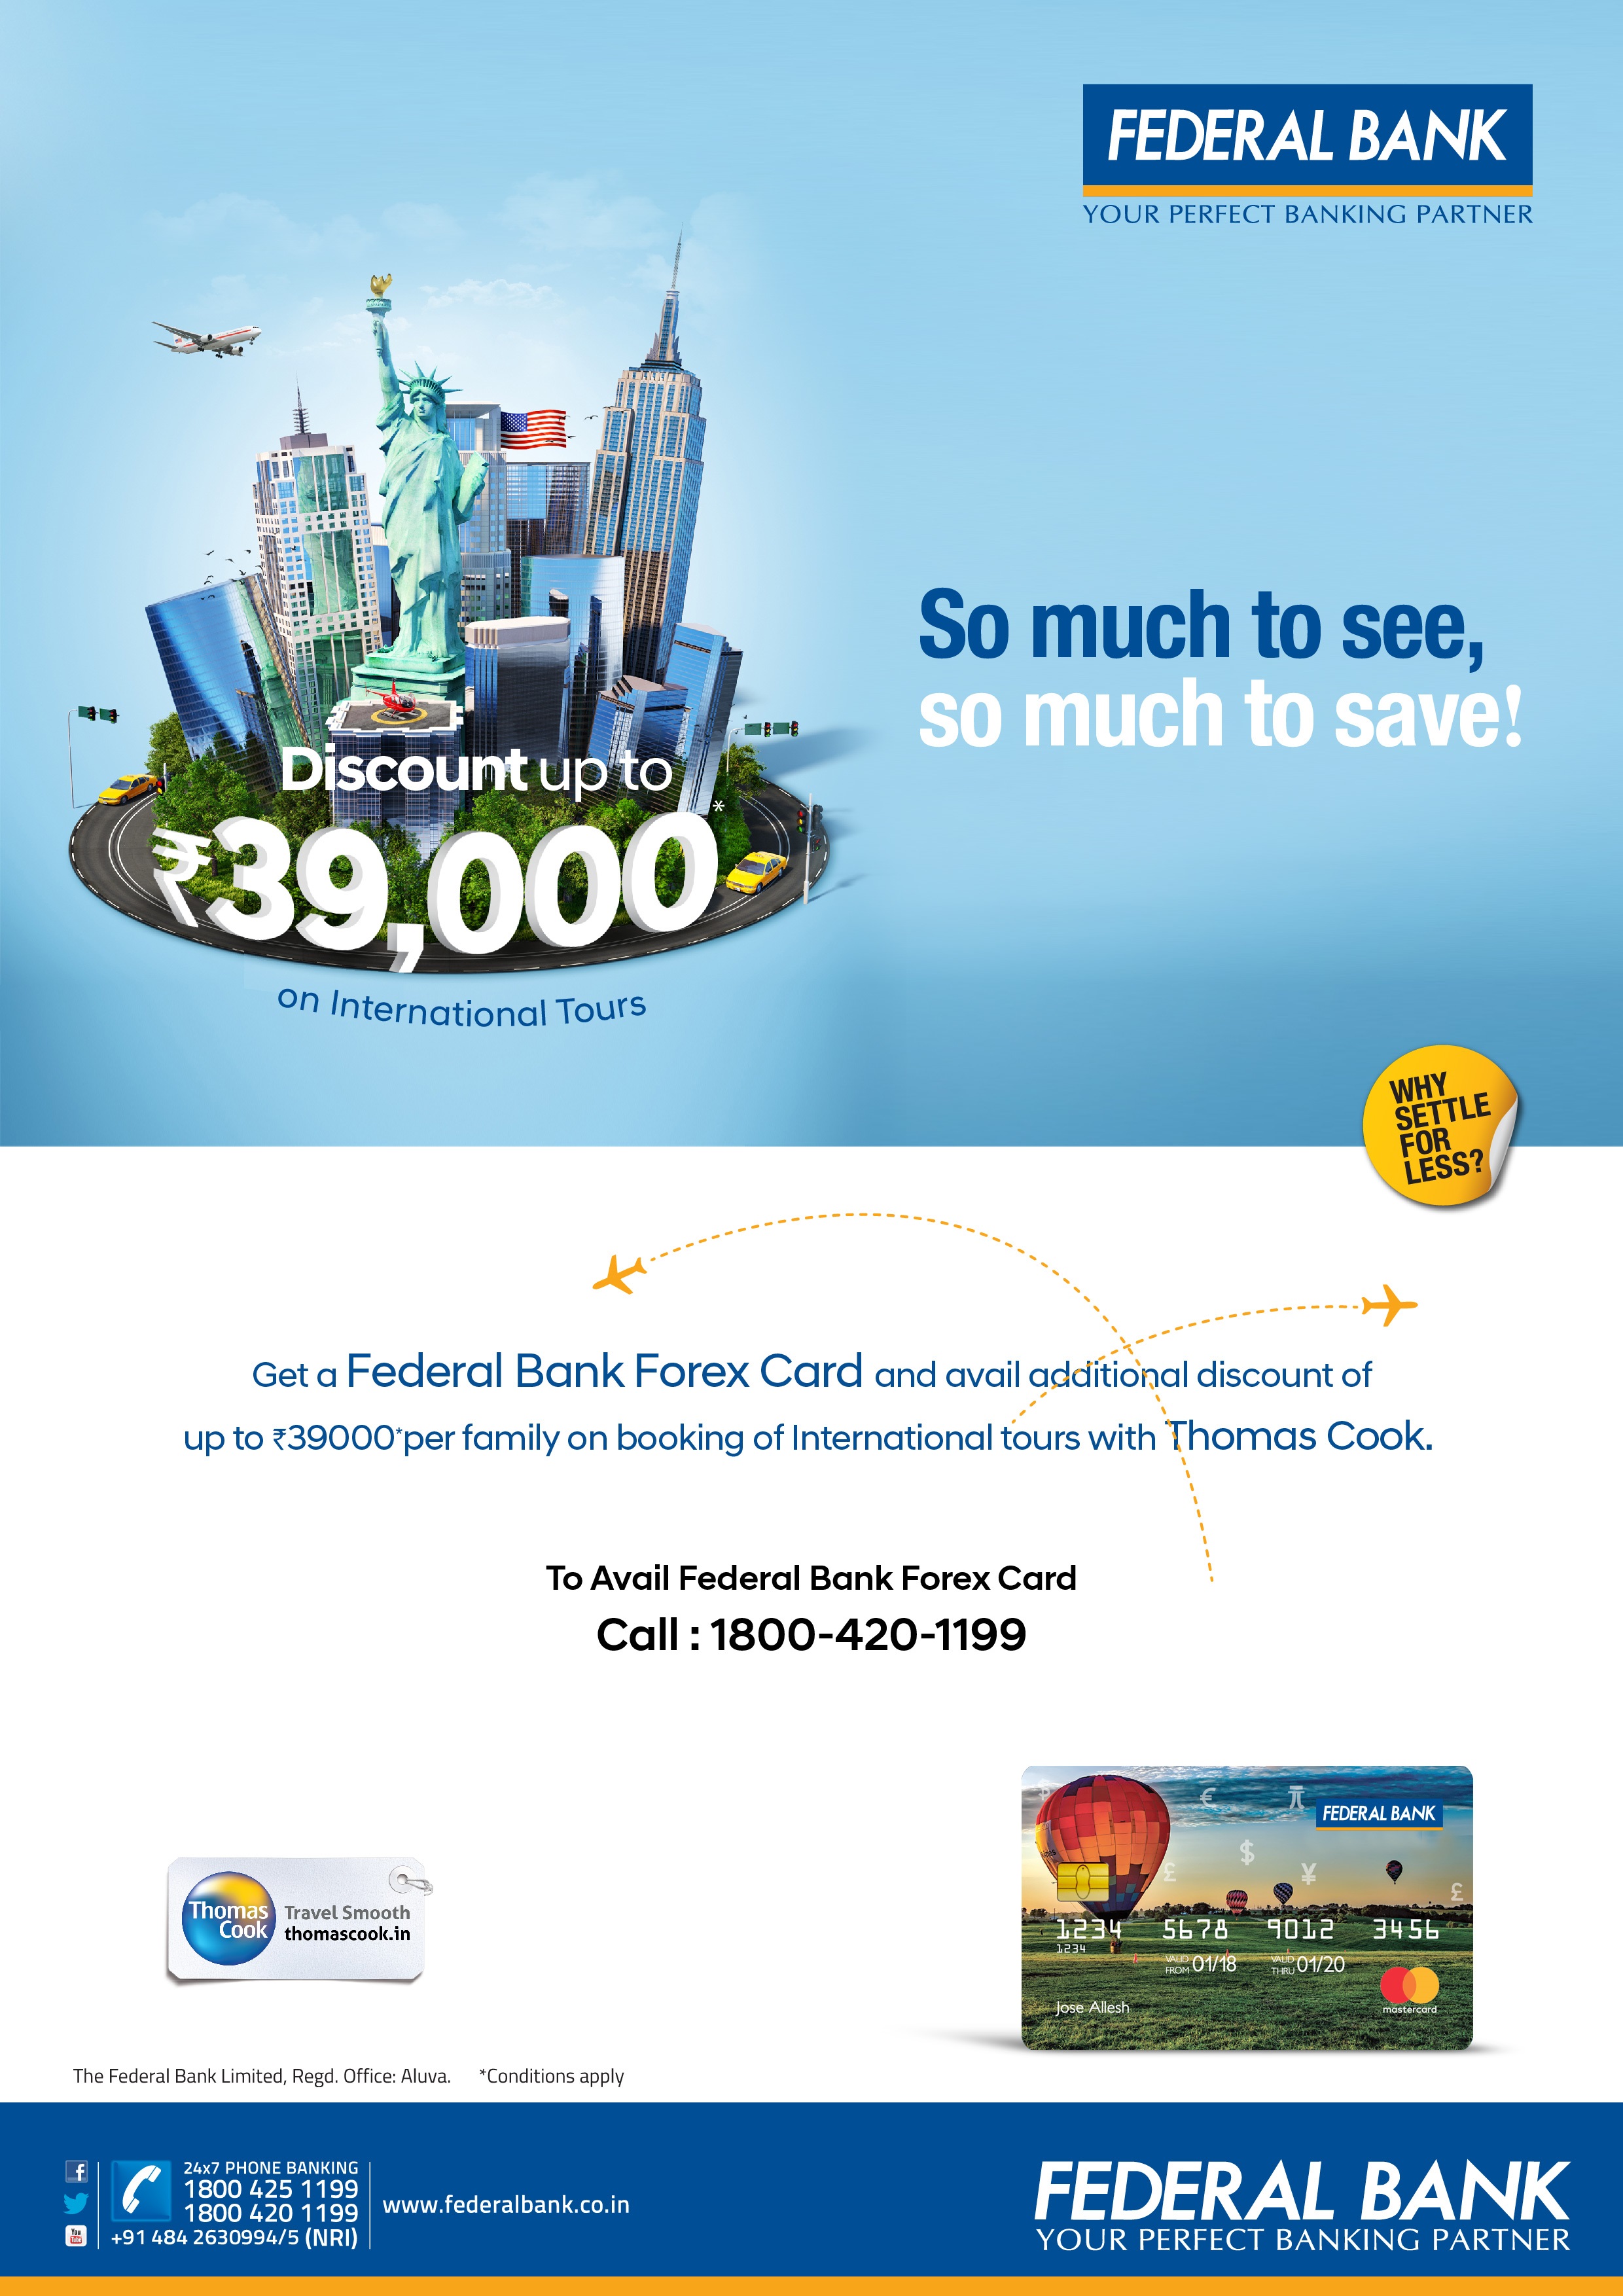 Thomas cook student forex card